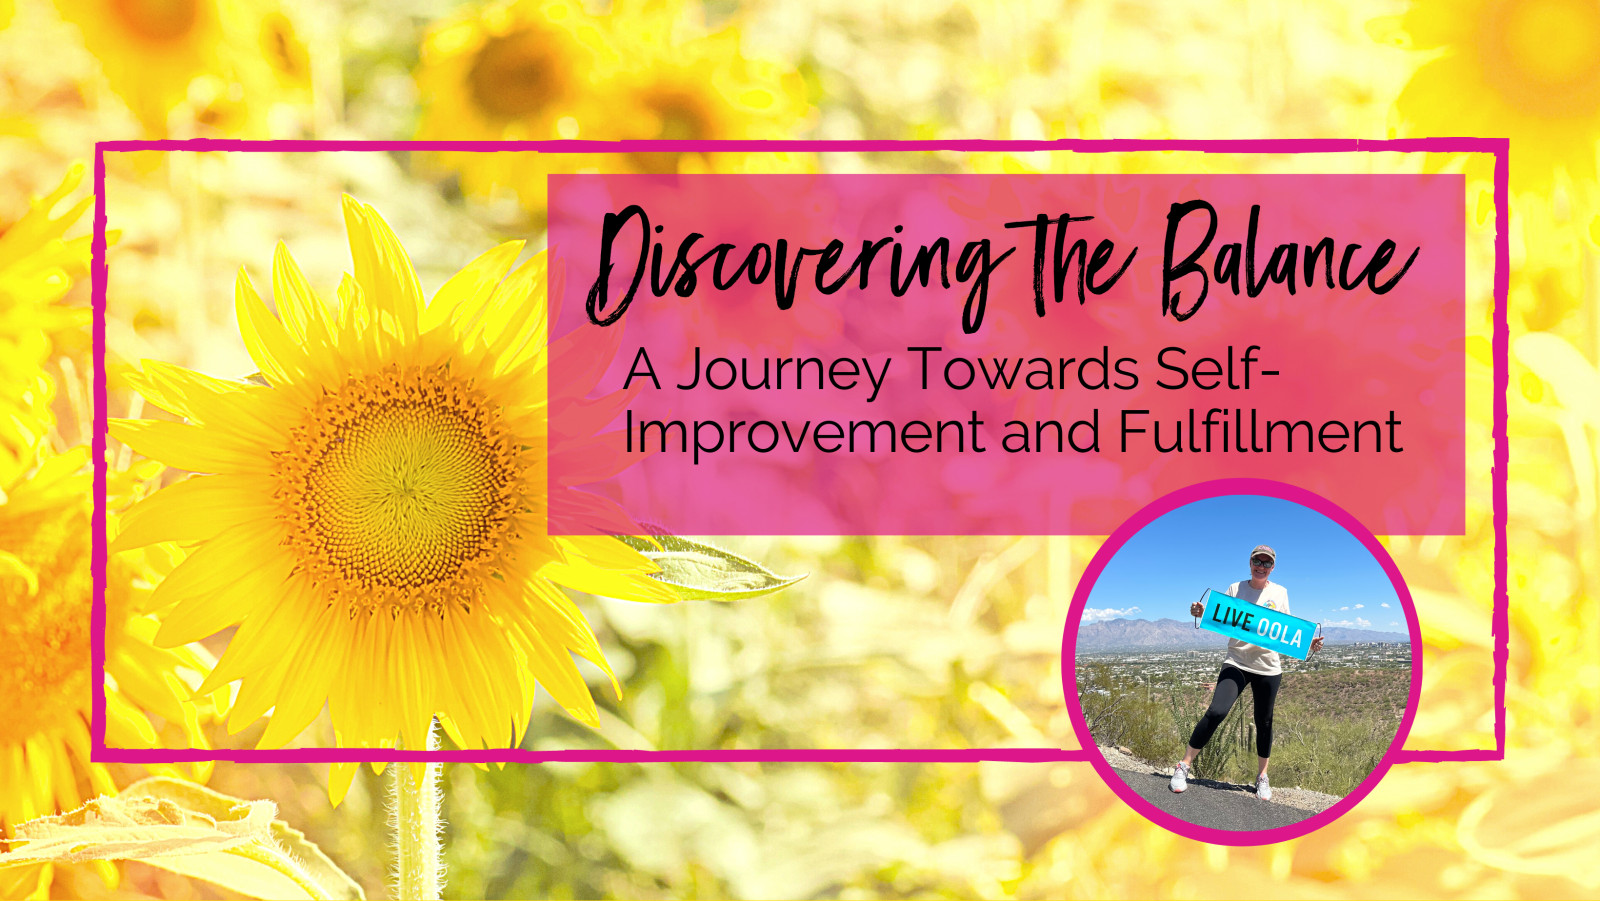 Discovering the Balance: A Journey Towards Self-Improvement and Fulfillment